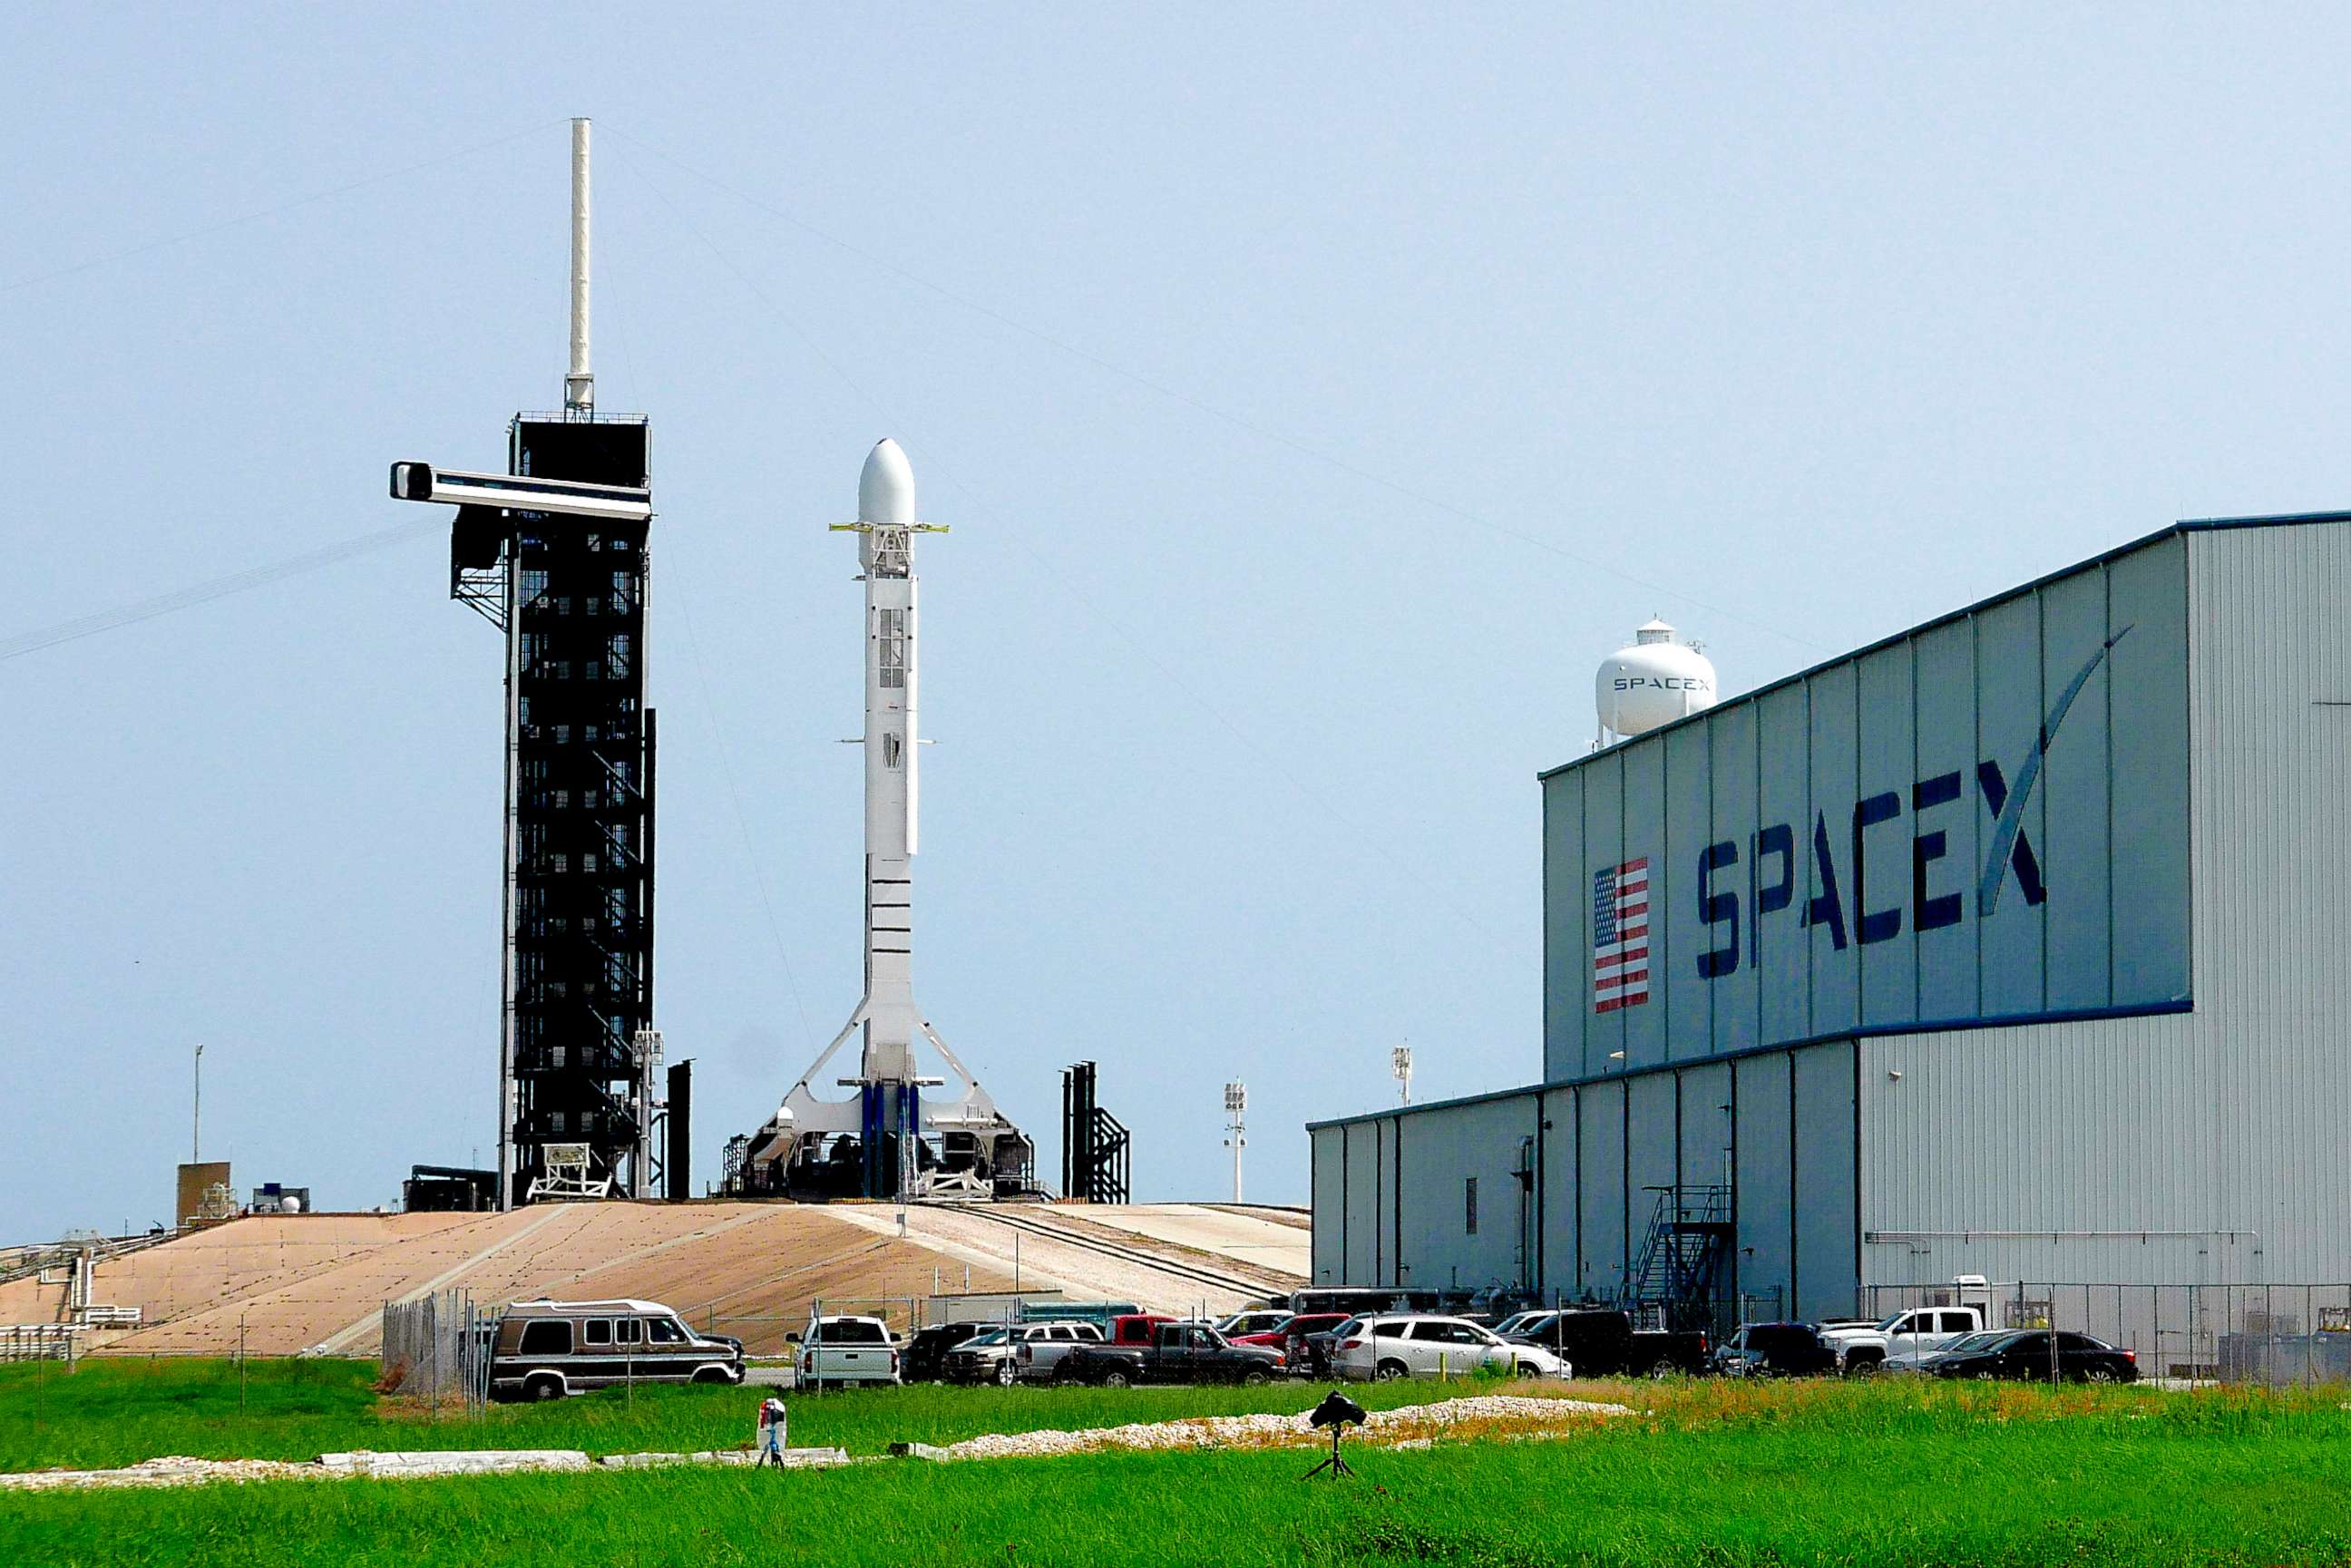 PHOTO: A Falcon 9 SpaceX rocket stands ready for launch at pad 39A at the Kennedy Space Center in Cape Canaveral, Fla., June 26, 2020.